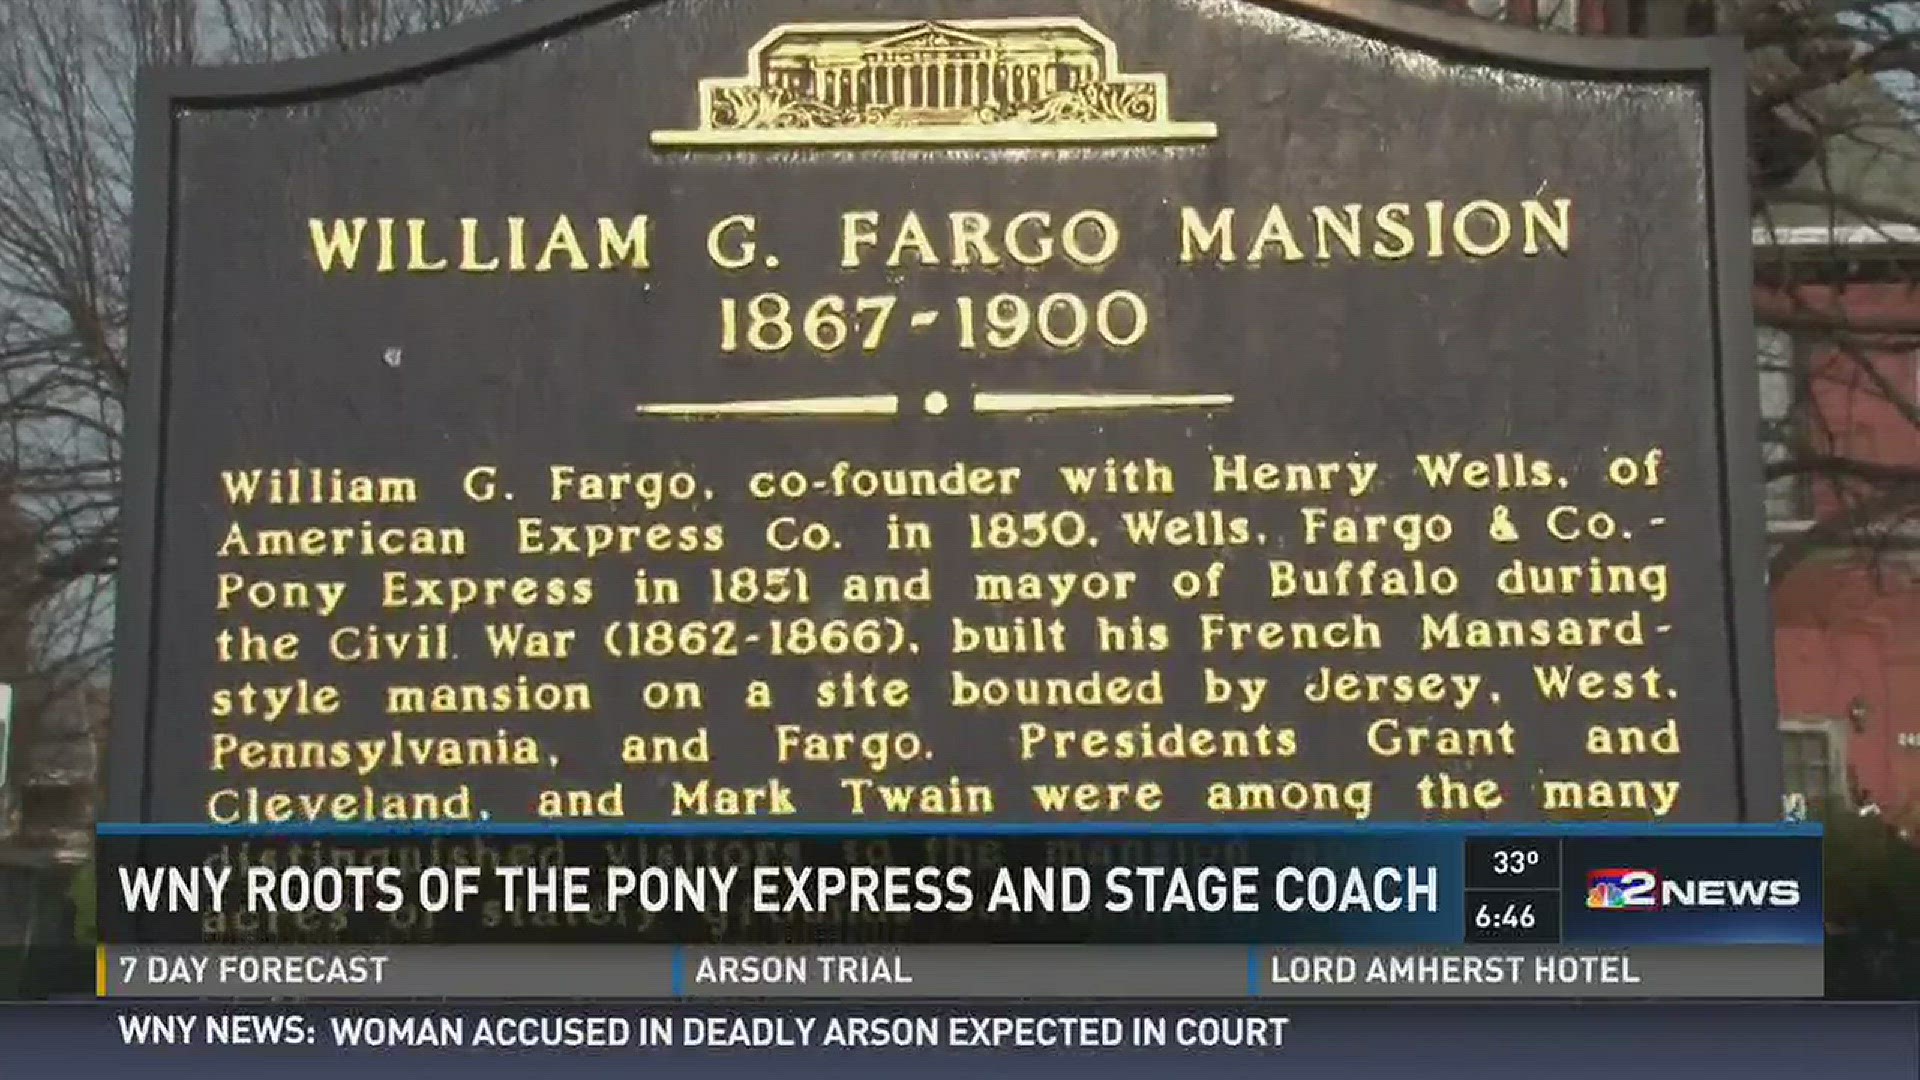 Unknown Stories of WNY: Roots of the Pony Express